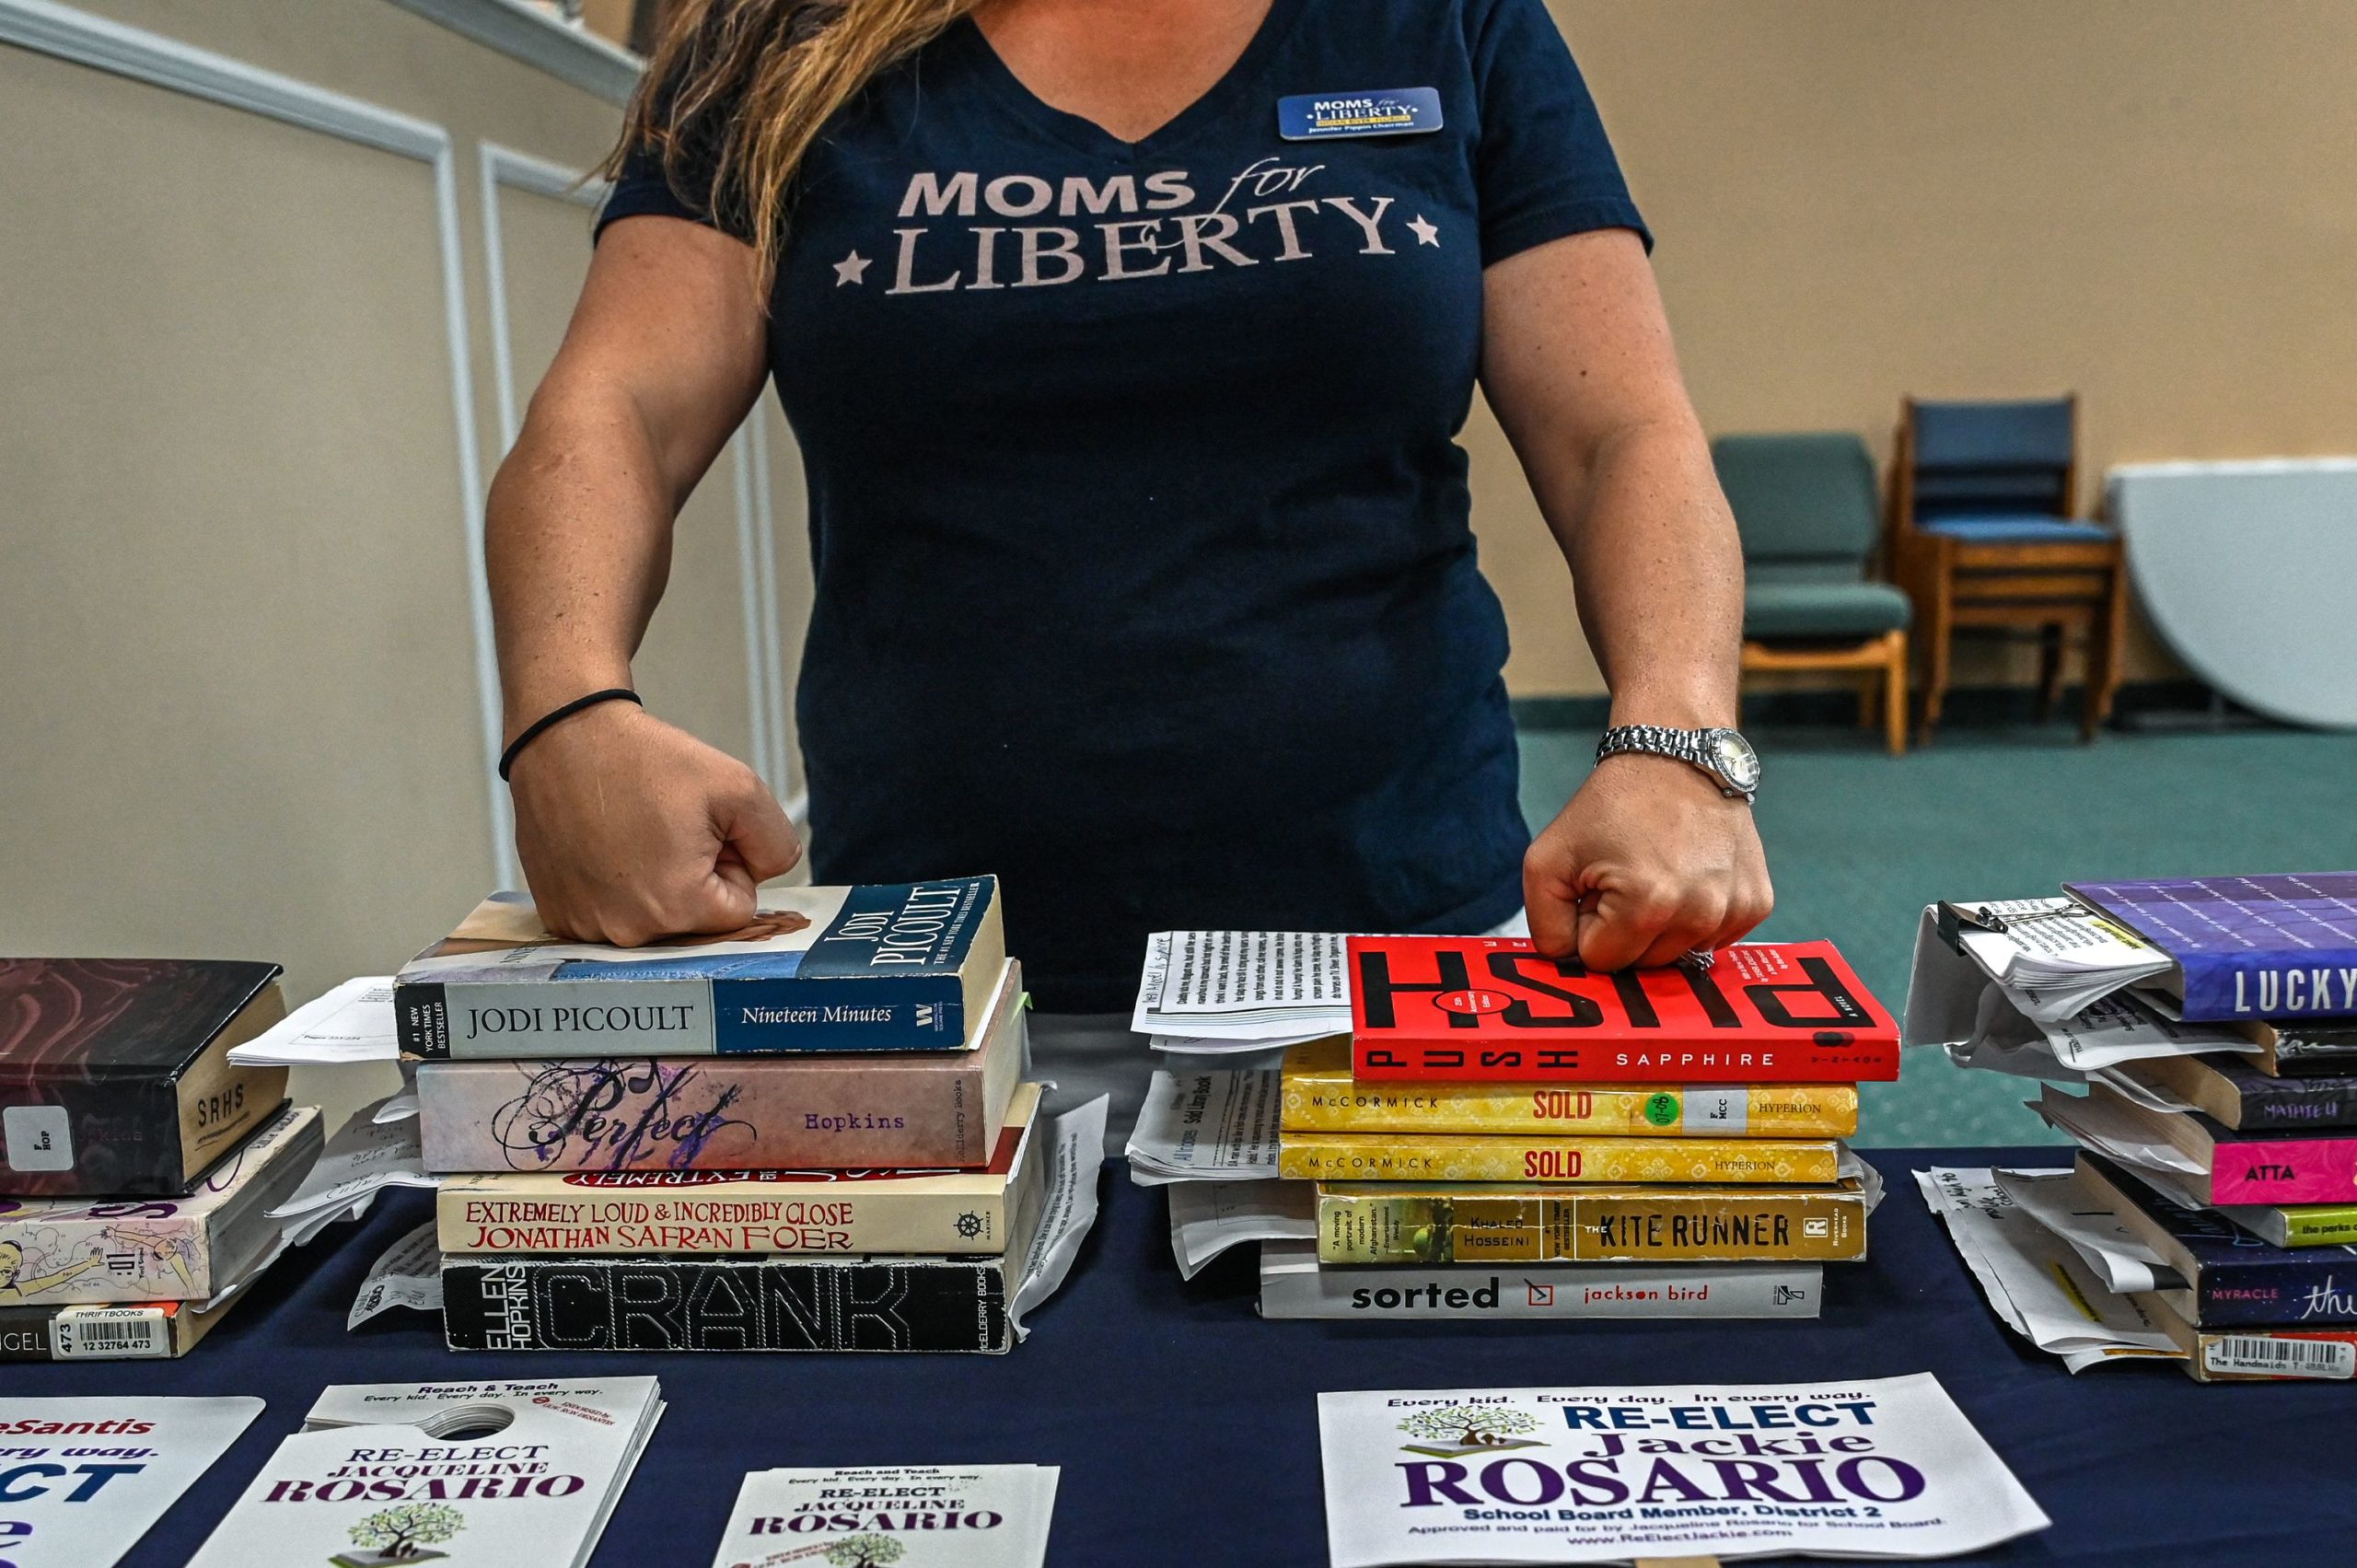 Jennifer Pippin, president of the Indian River County chapter of Moms for freedom, attends Jacqueline Rosario's campaign event in Vero Beach, Florida on October 16, 2022. - Rosario's candidacy for re-election to a school board is supported by the controversial group "Moms for Liberty", which claims to defend the "rights of parents" but is accused by its critics of opposing LGBT rights. Long dormant and apolitical institutions, these councils, whose members are elected, have become real powder kegs with the politicization of subjects such as the discussion of gender or sexuality in schools, or the teaching of racism. Education has been at the heart of some mid-term elections. (Photo by Giorgio VIERA / AFP) (Photo by GIORGIO VIERA/AFP via Getty Images)